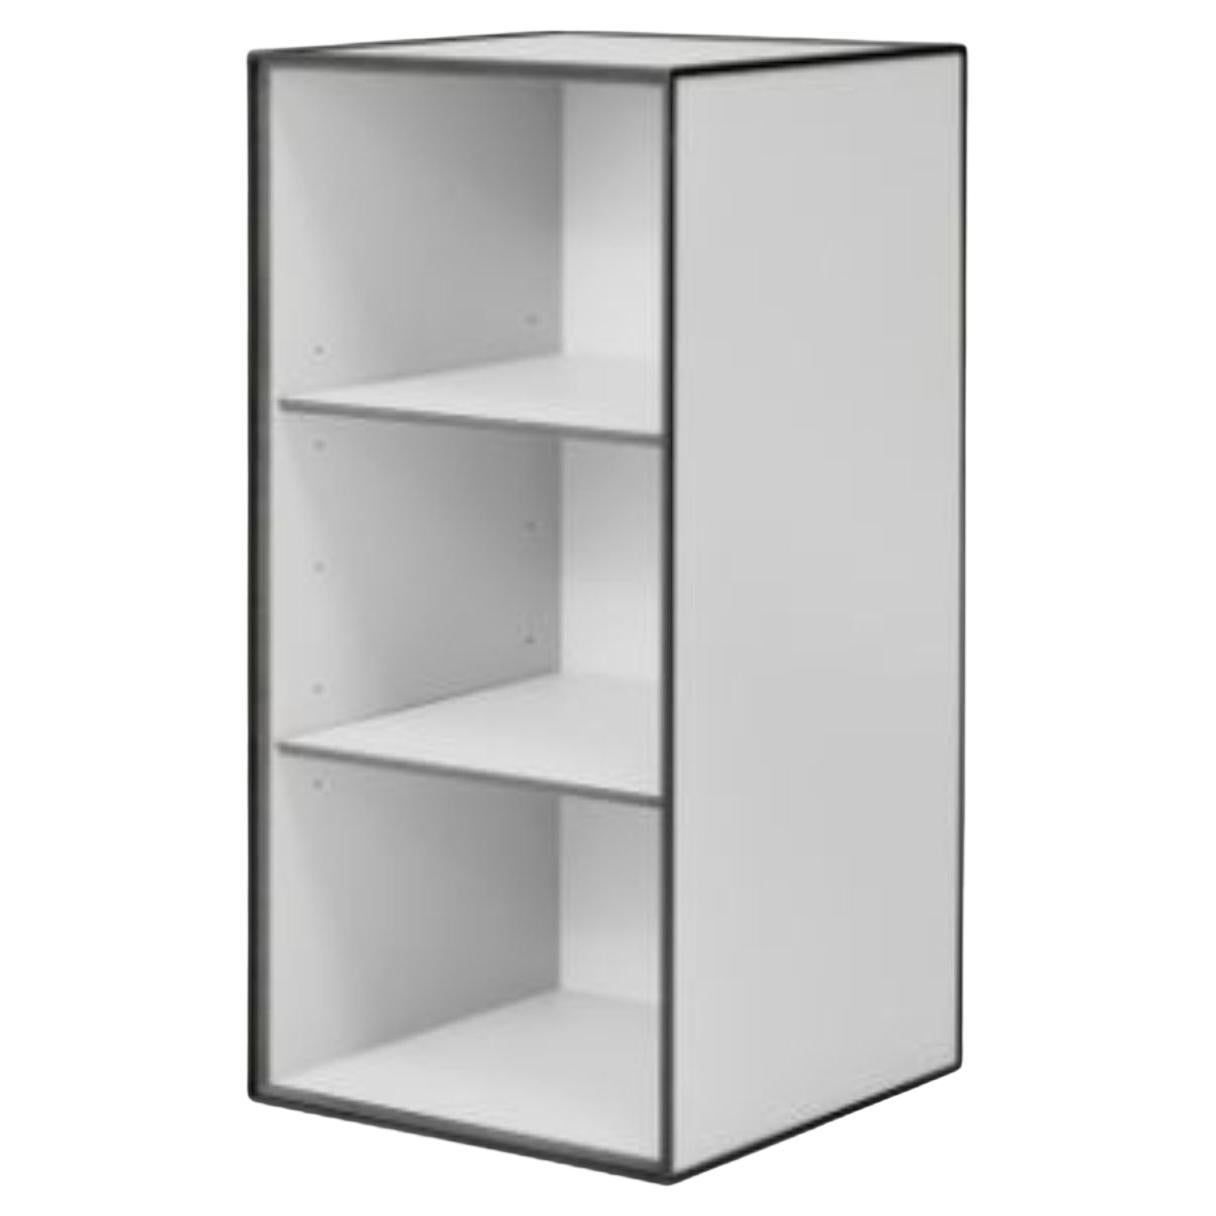 70 Light Grey Frame Box with 2 Shelves by Lassen For Sale